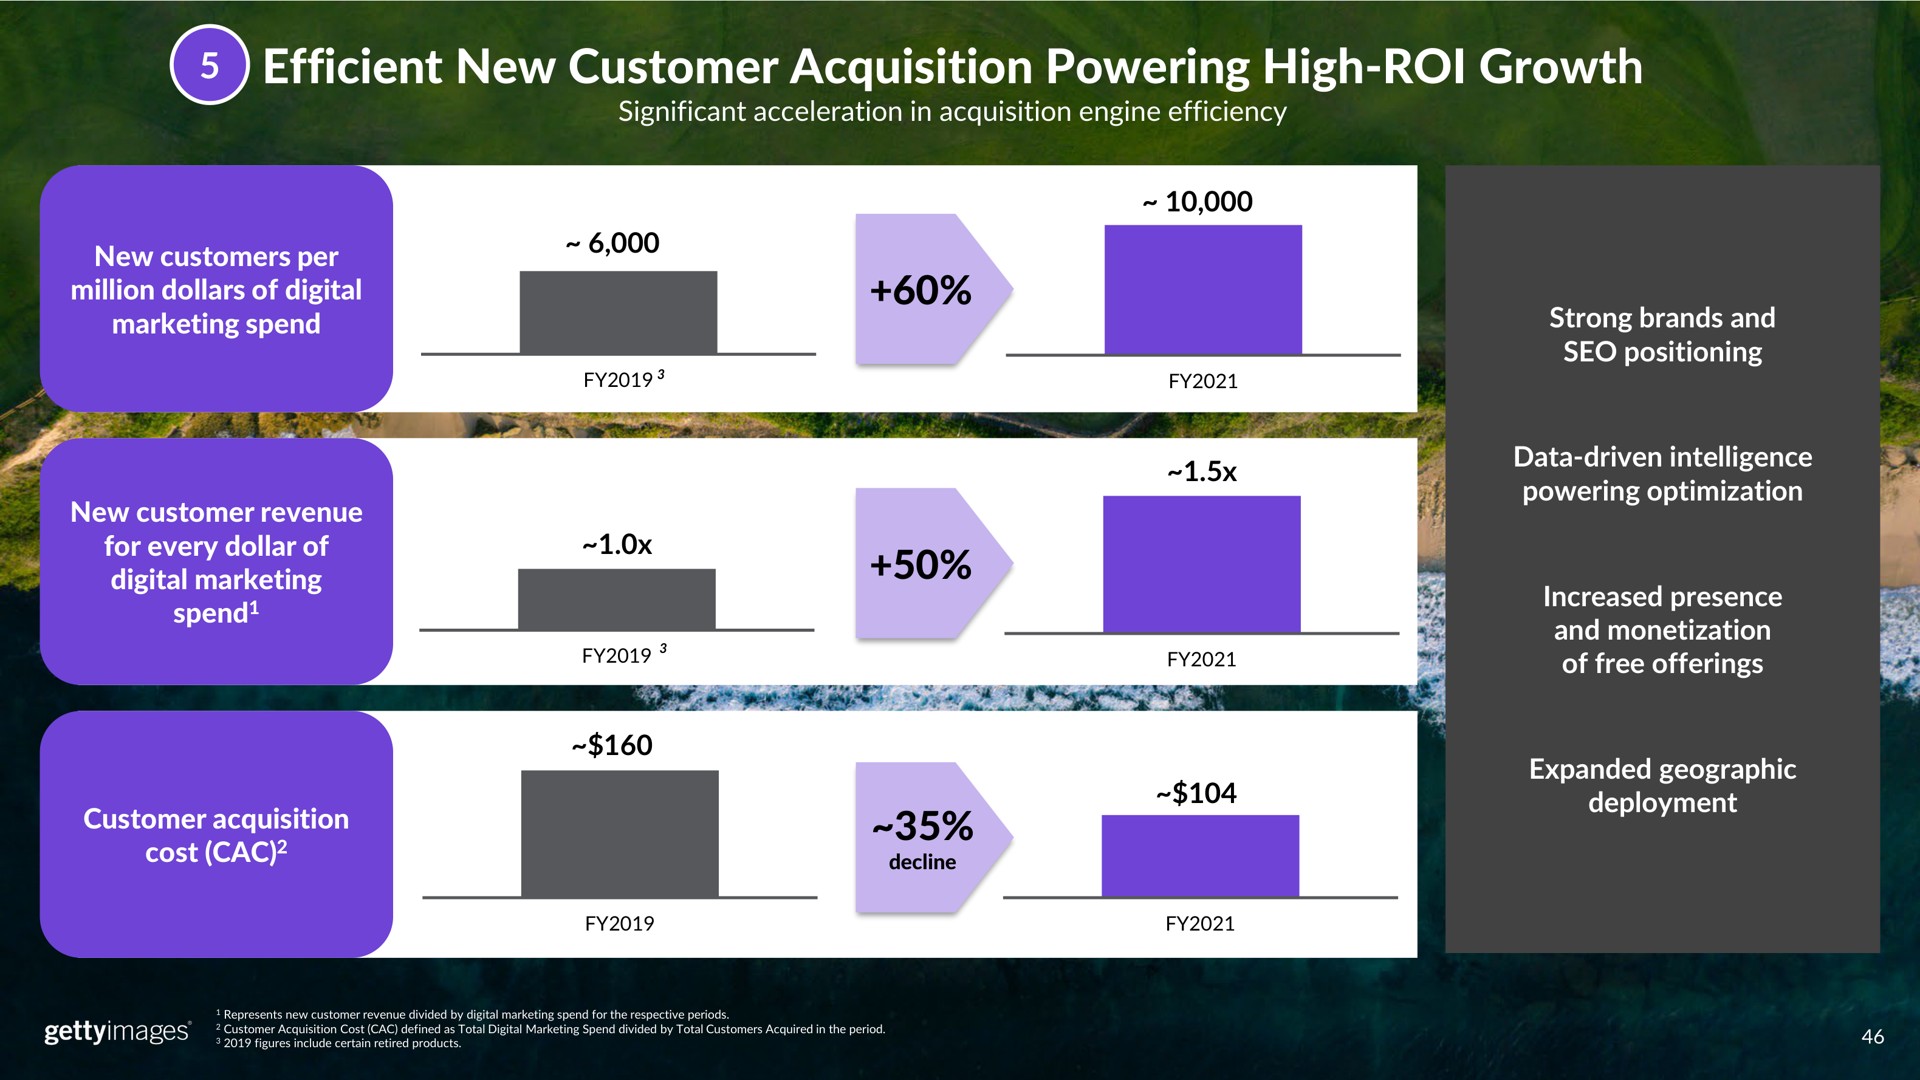 efficient new customer acquisition powering high roi growth | Getty